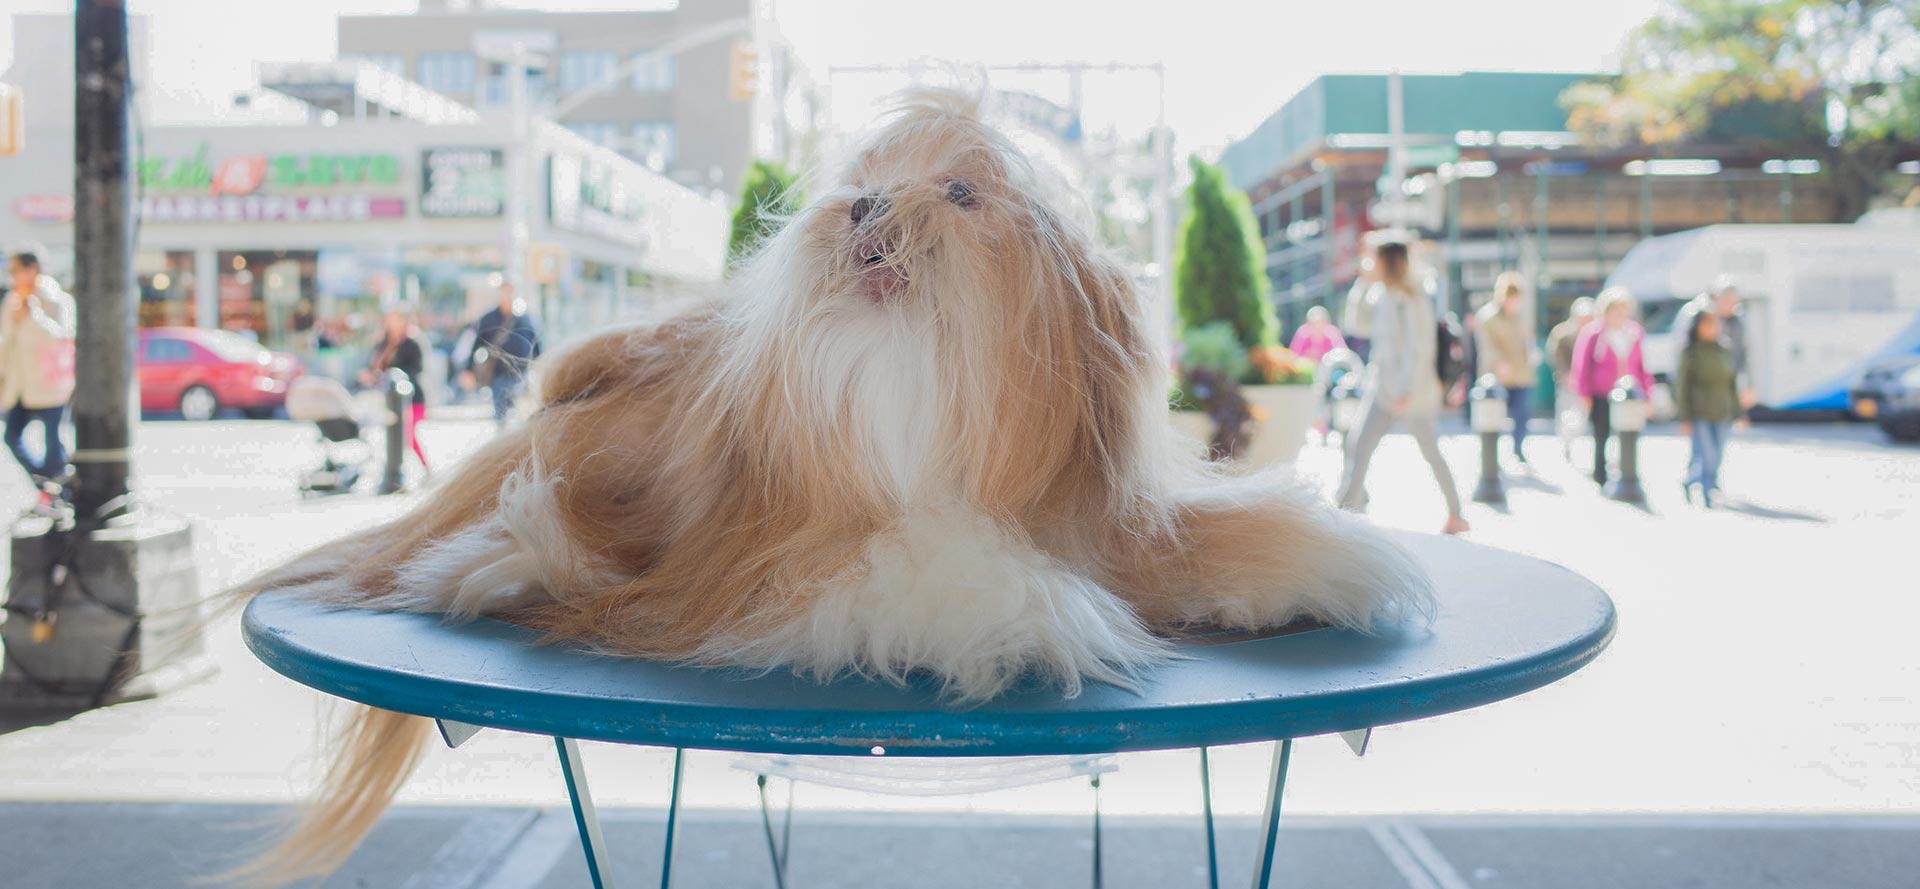 Long haired dog on table.